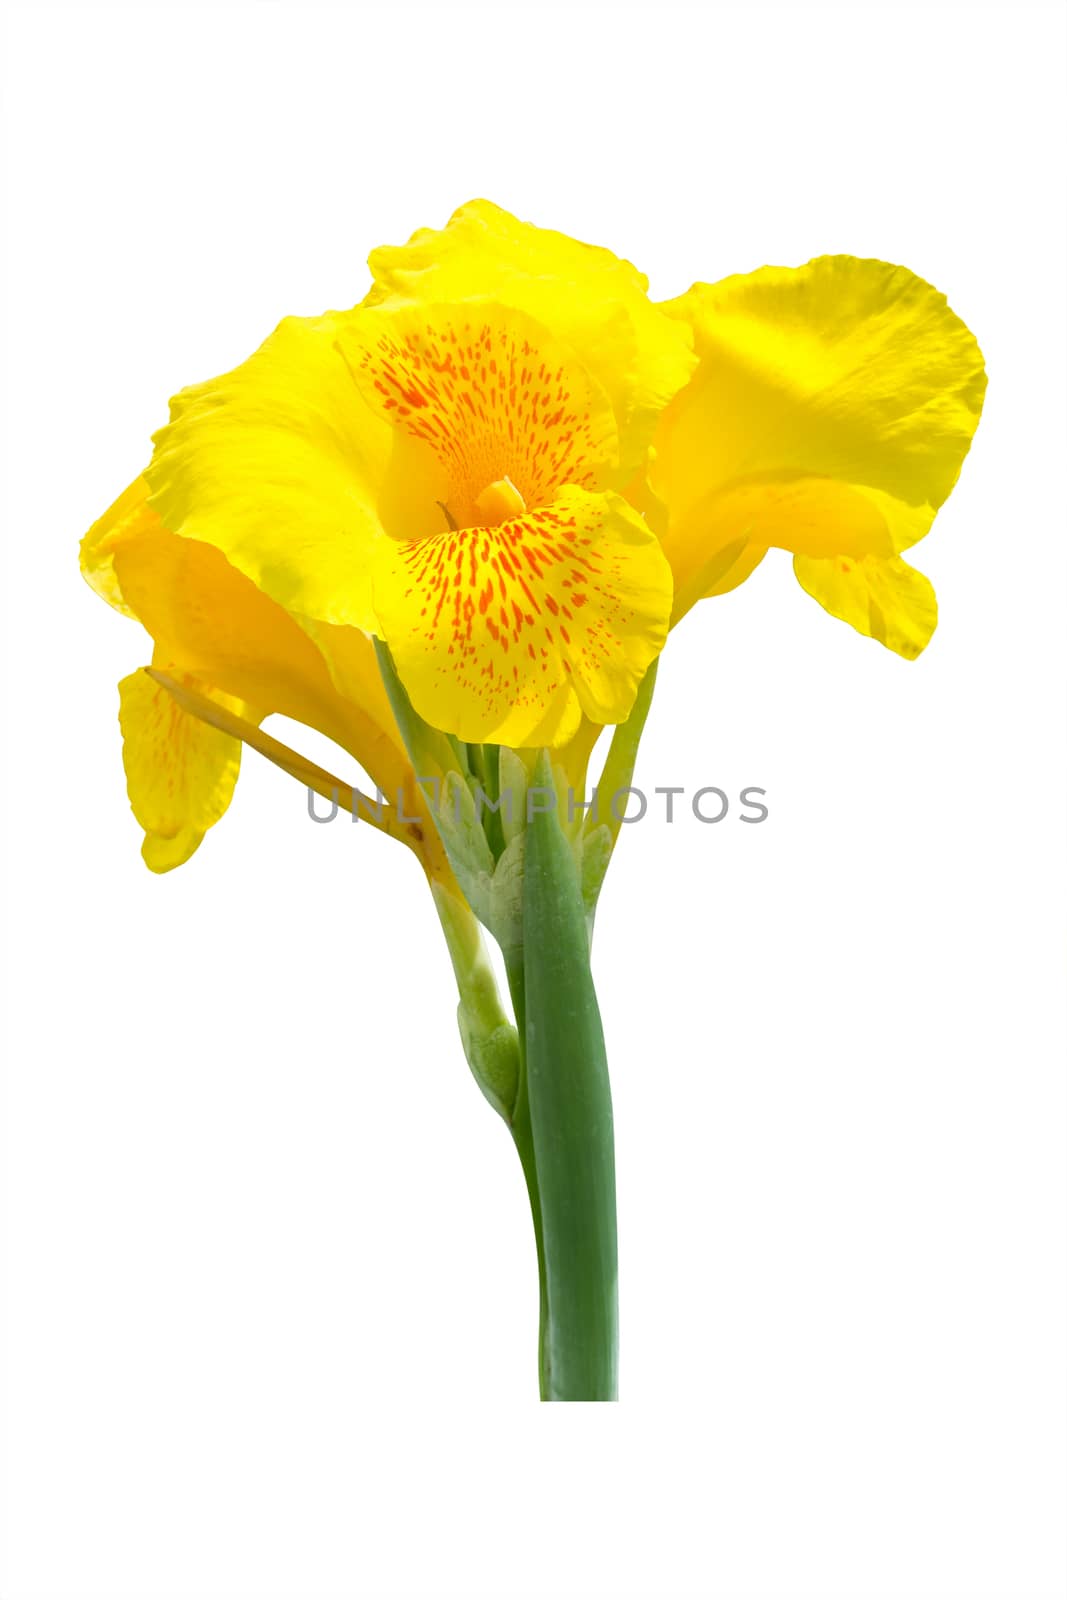 Yellow canna lily flowers on white background. Clipping path by Kumma